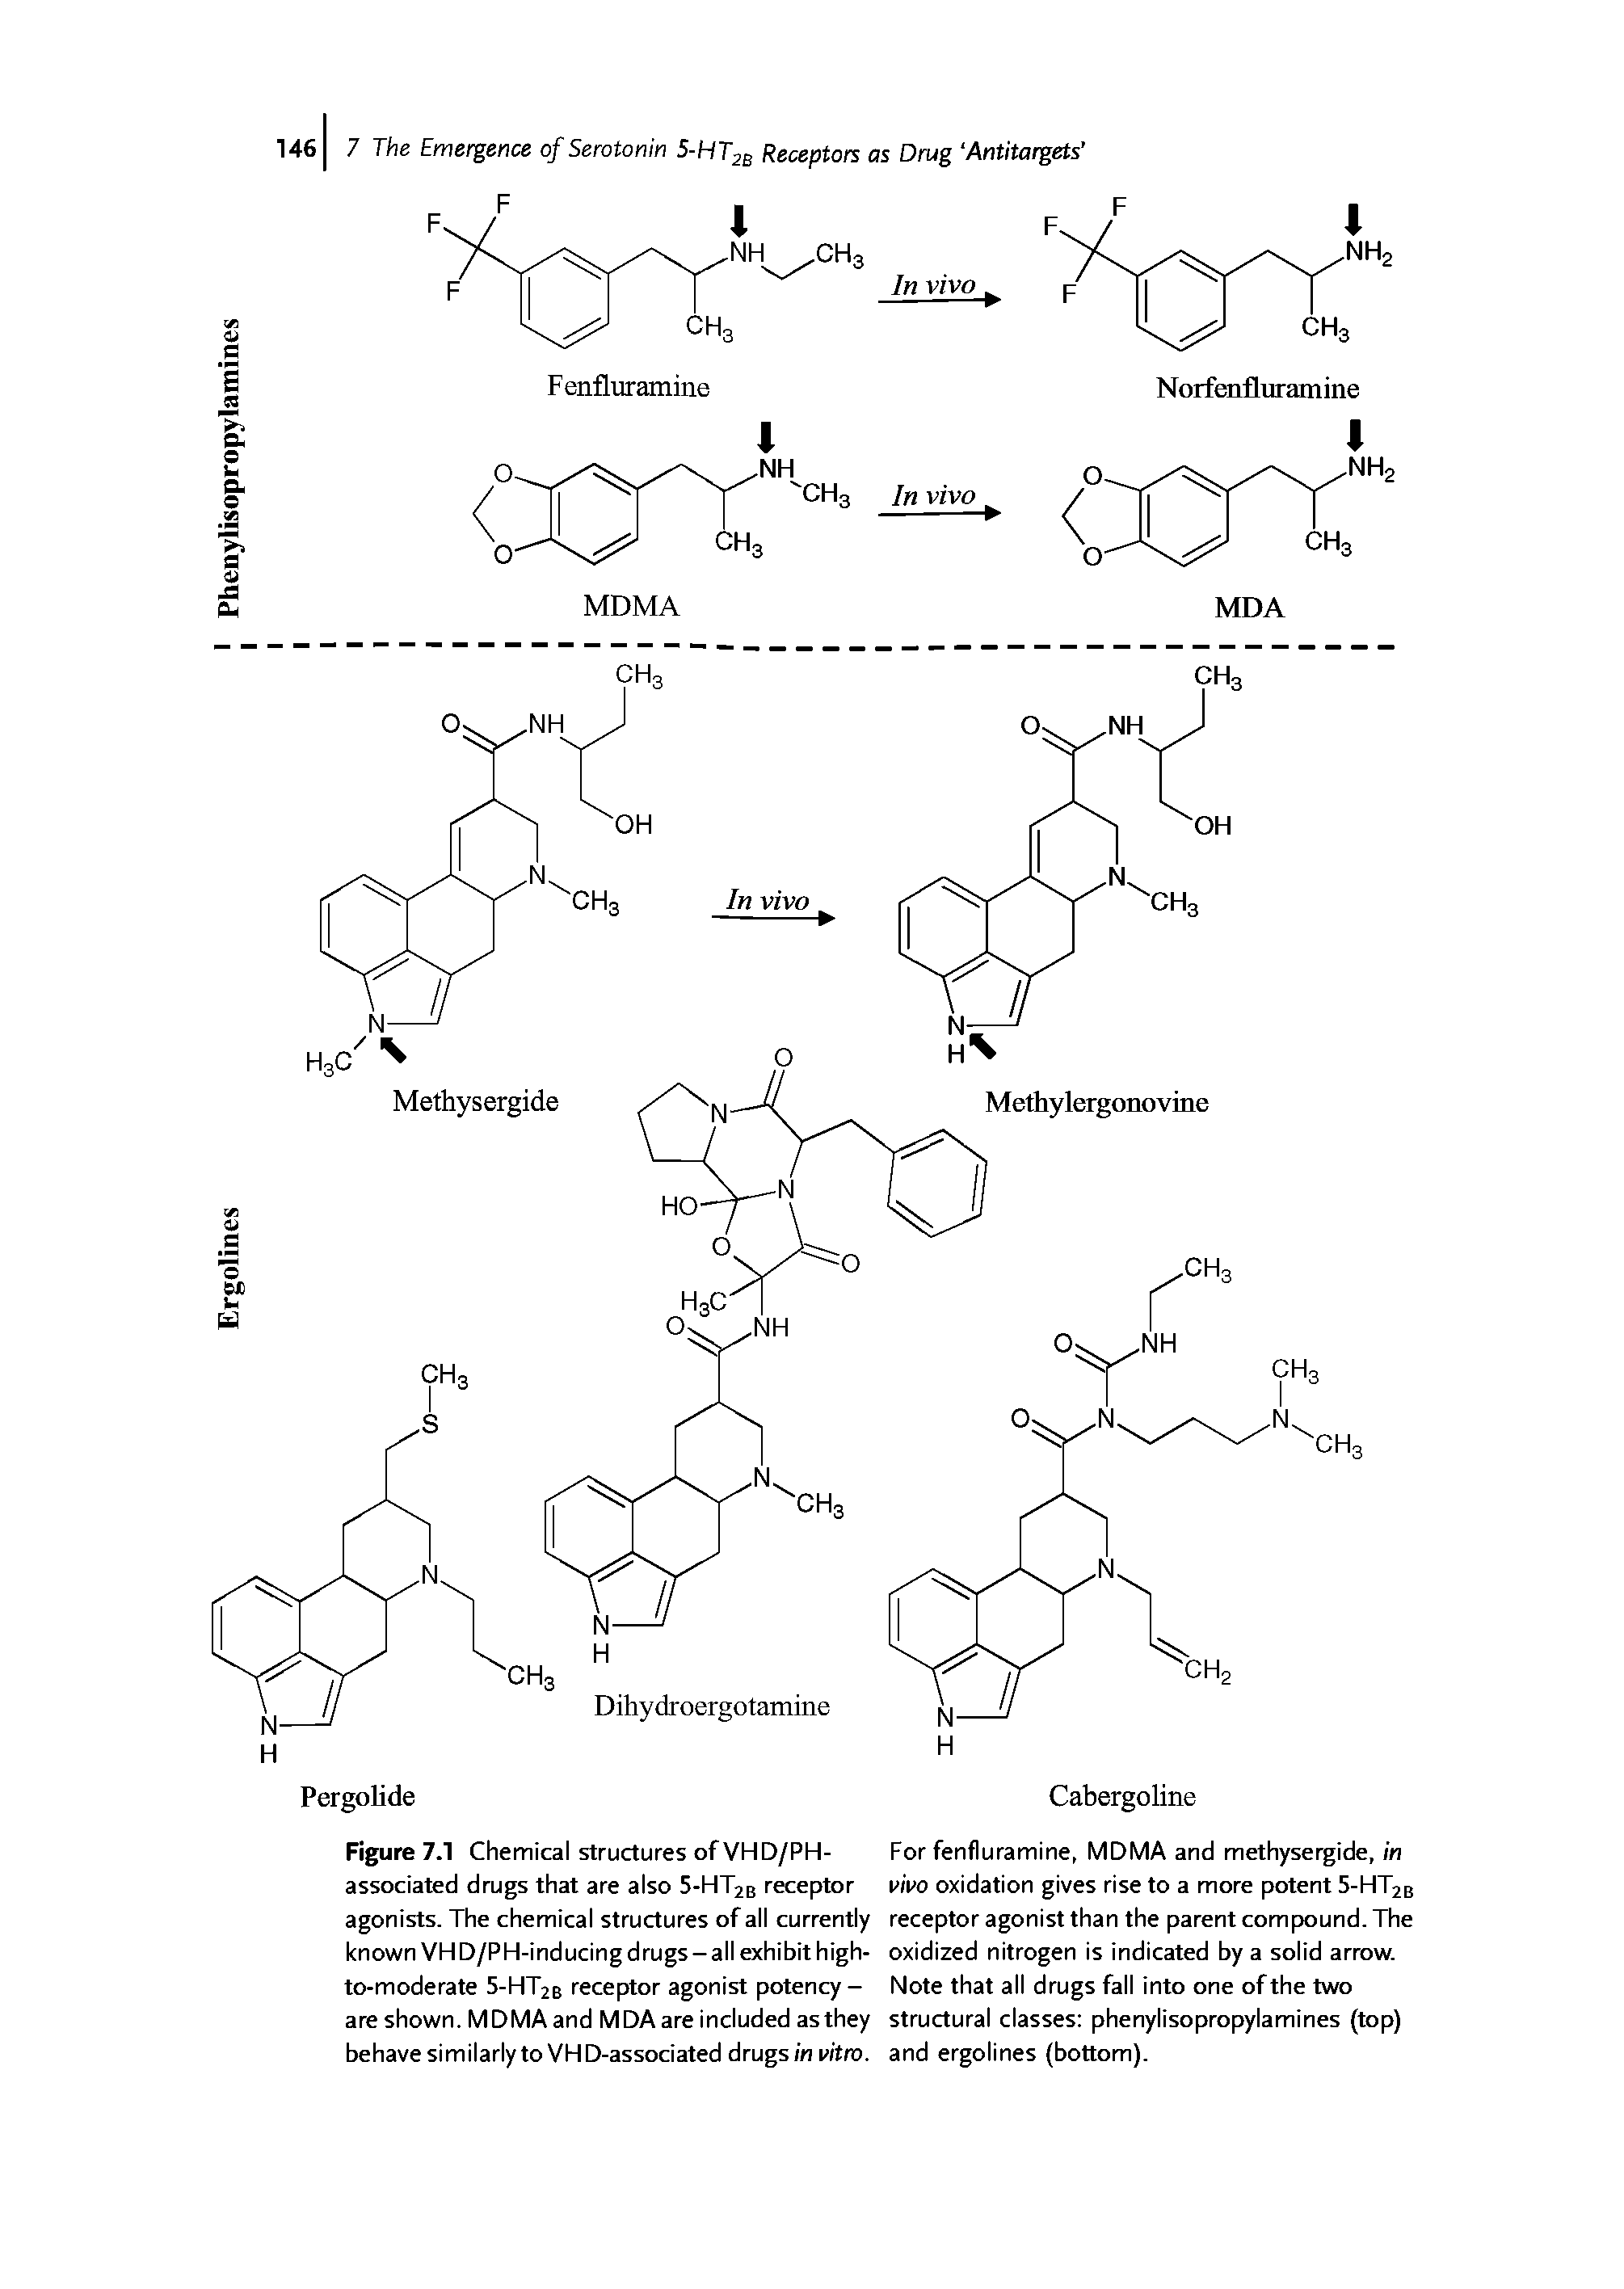 Figure 7.1 Chemical structures of VHD/PH-associated drugs that are also 5-HT2B receptor agonists. The chemical structures of all currently known VHD/PH-inducing drugs-all exhibit high-to-moderate 5-HT2B receptor agonist potency -are shown. MDMA and MDA are included as they behave similarly to VHD-associated drugs in vitro.